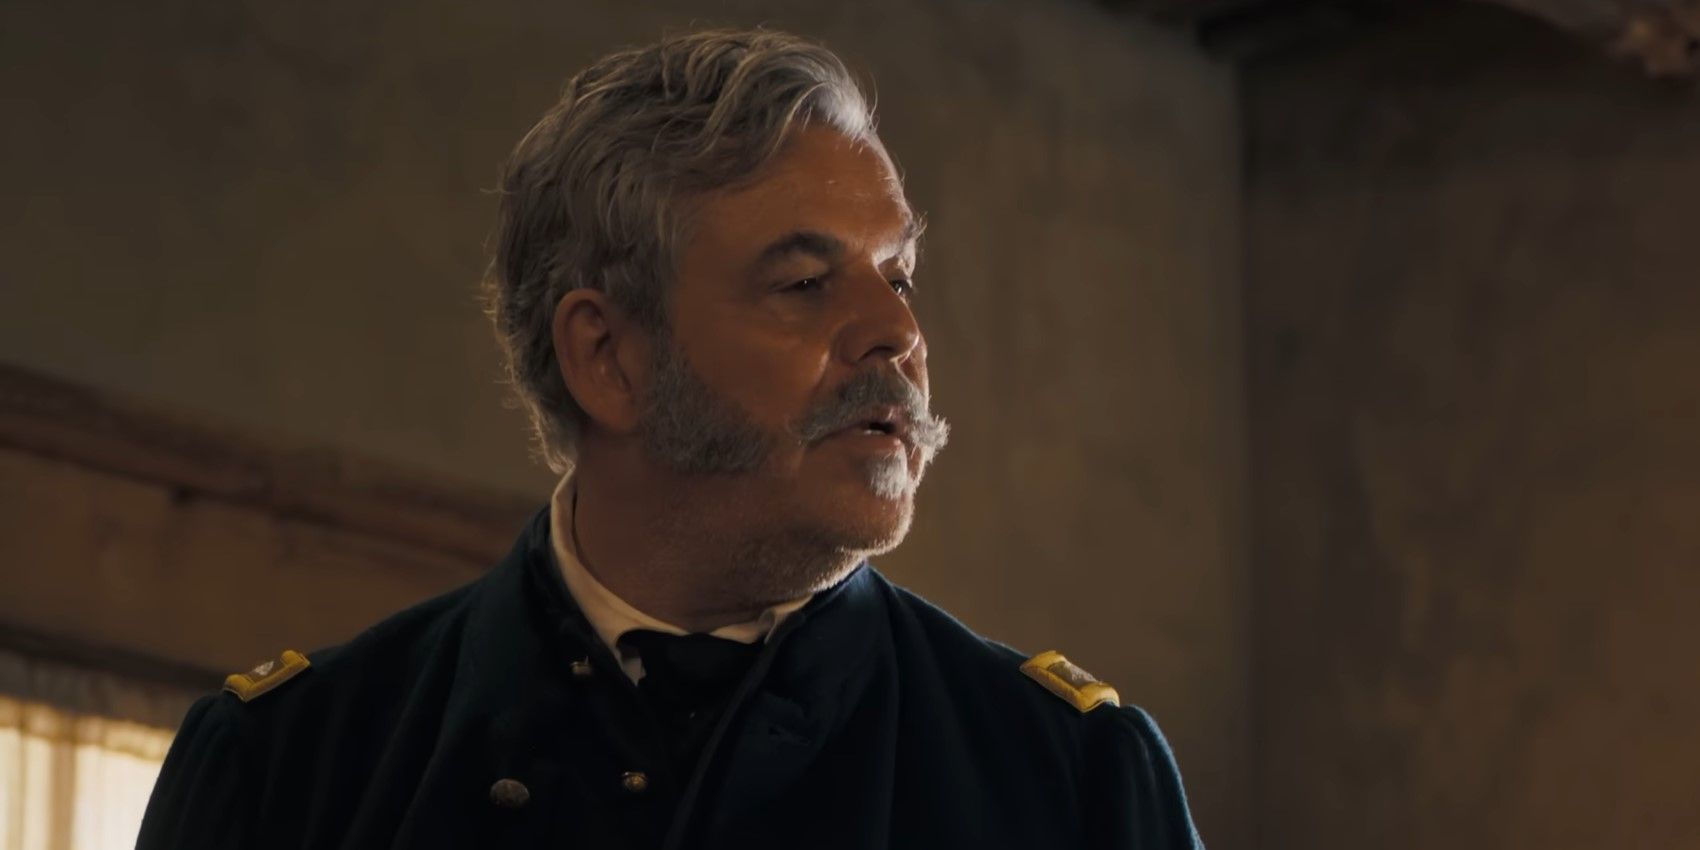 Danny Huston wearing a Union suit and sporting a mustache and sideburns in the trailer for Horizon: An American Saga - Chapter 1